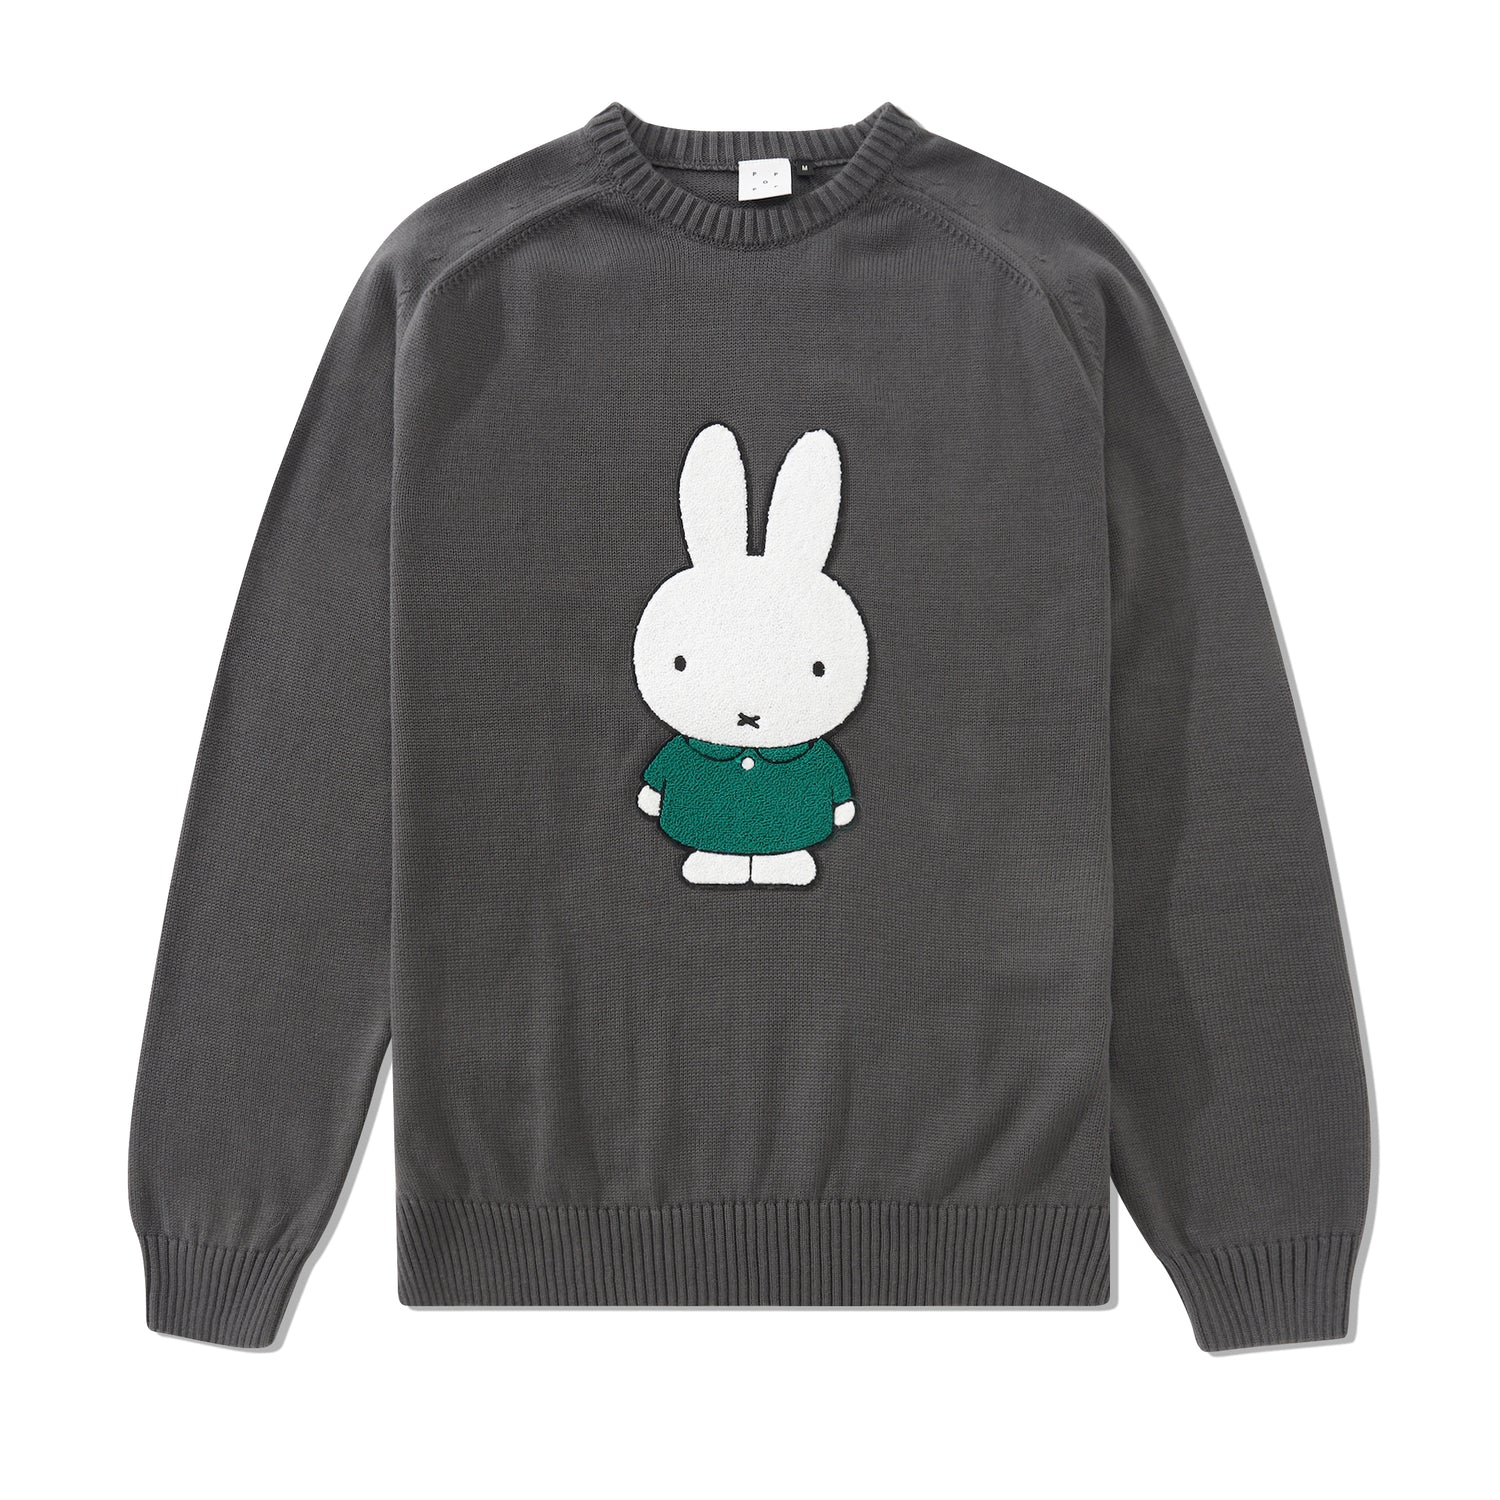 Miffy Applique Knitted Crewneck, Grey